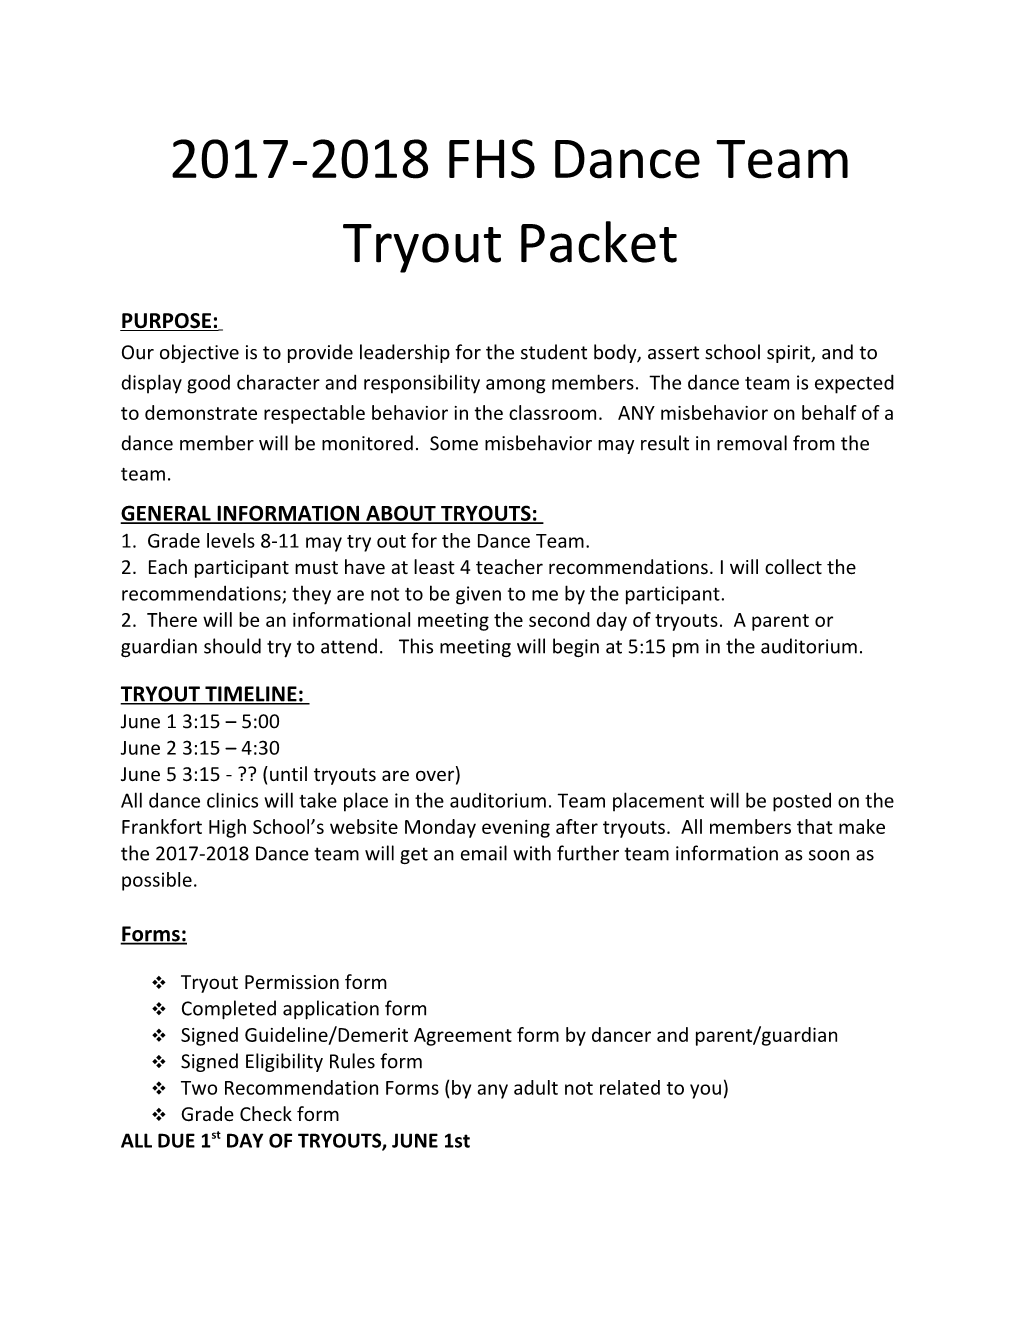 2017-2018 FHS Dance Team Tryout Packet